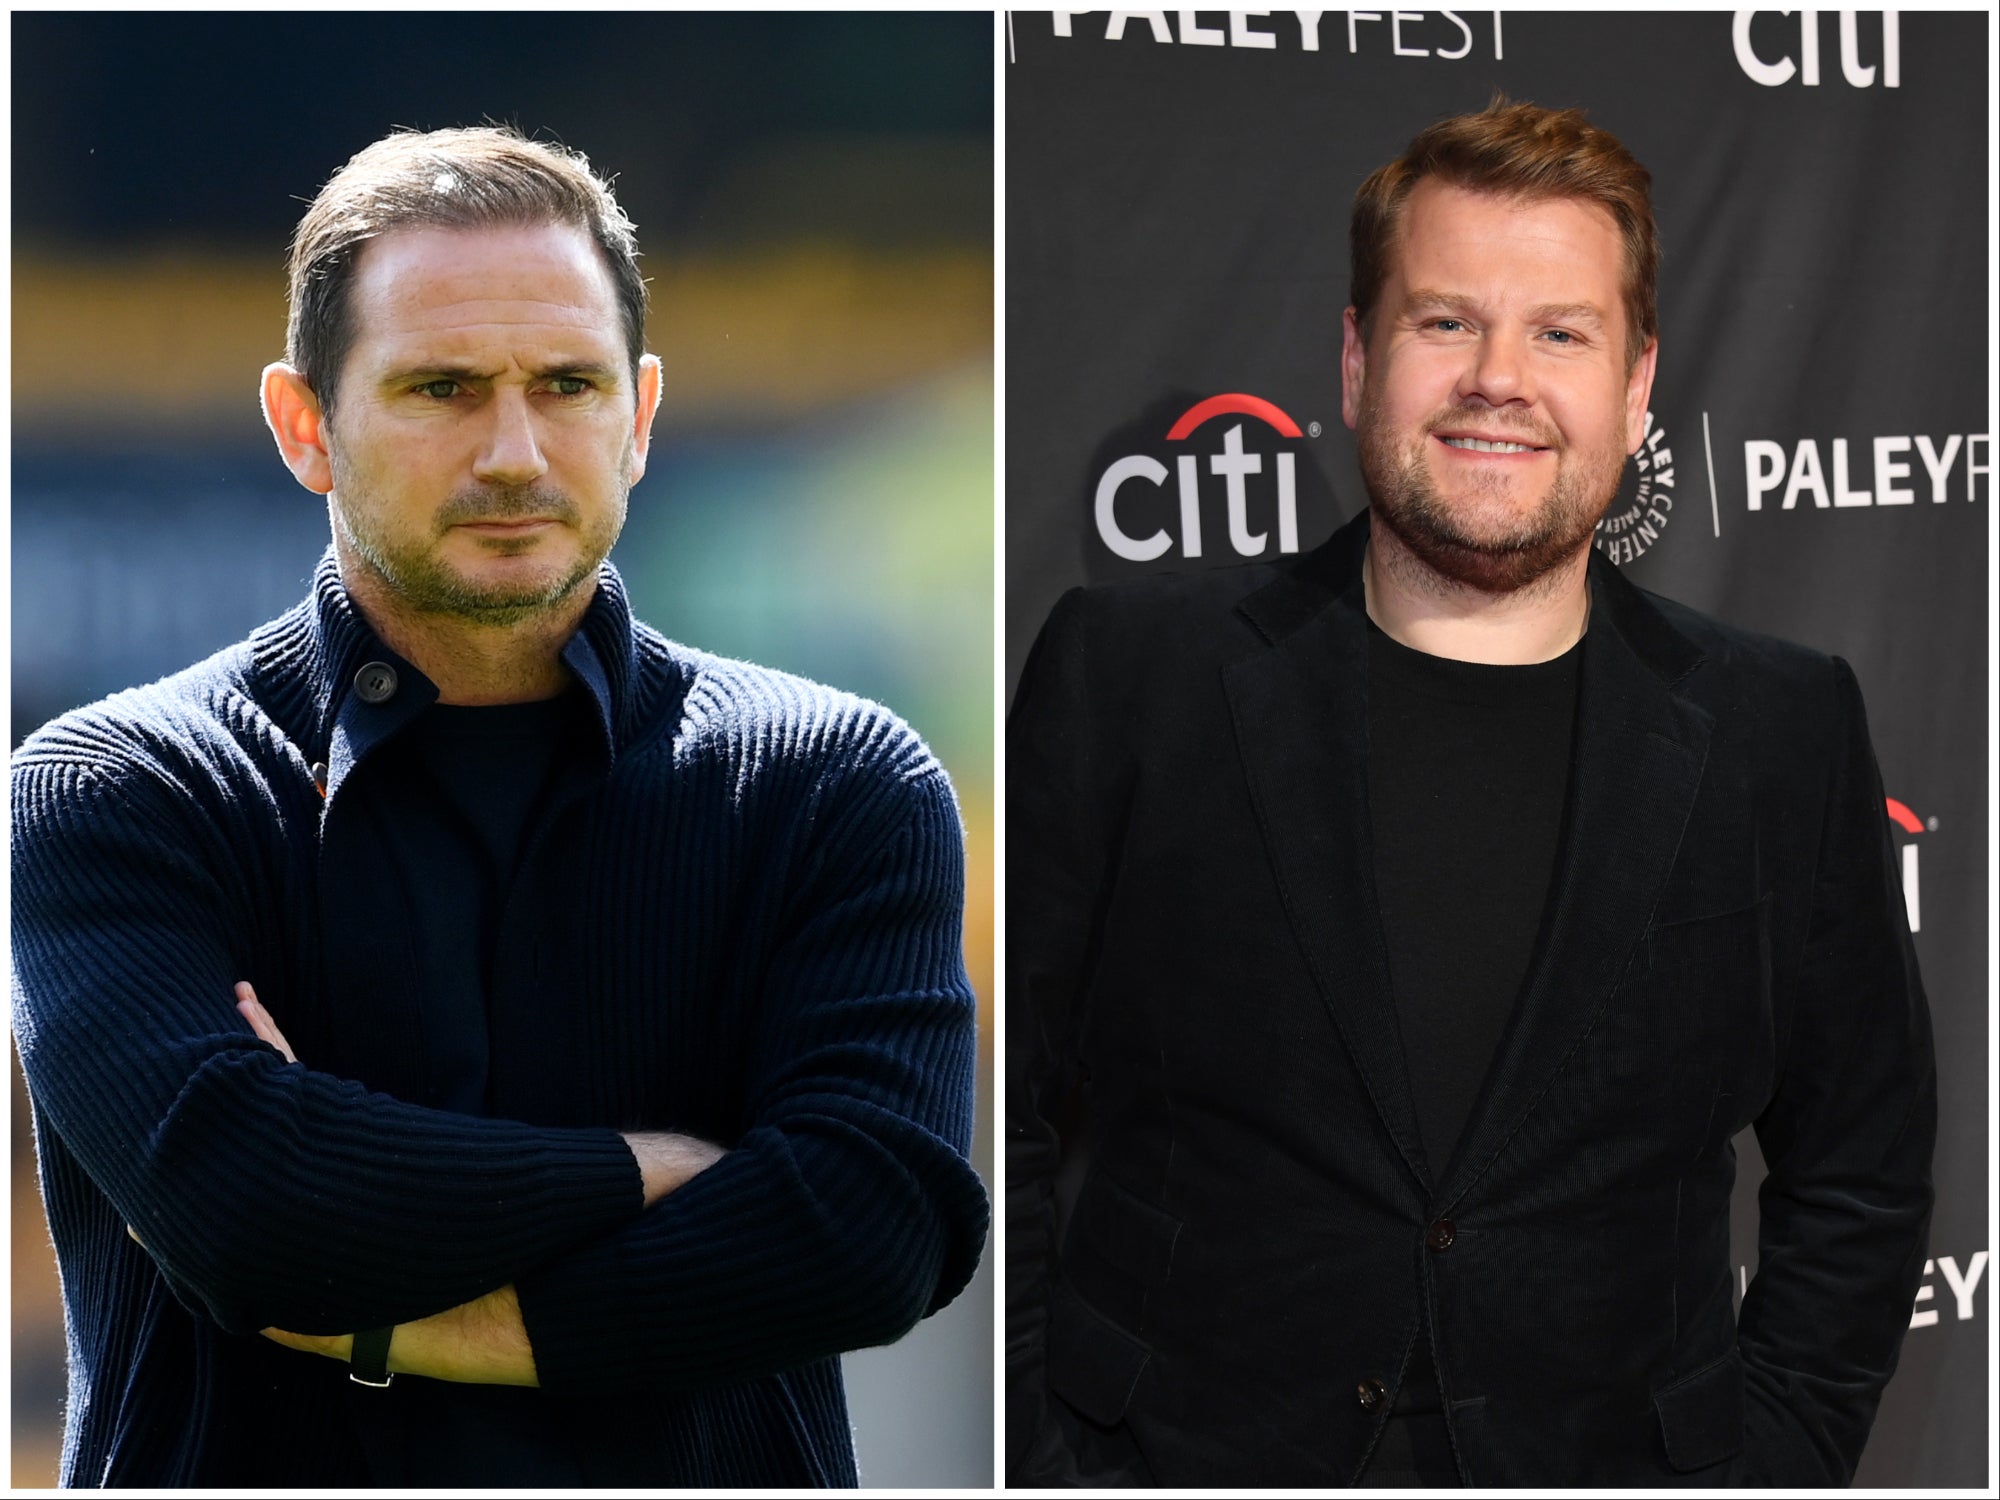 Frank Lampard has rubbished claims Chelsea owner Todd Boehly appointed him as interim manager after a recommendation from James Corden